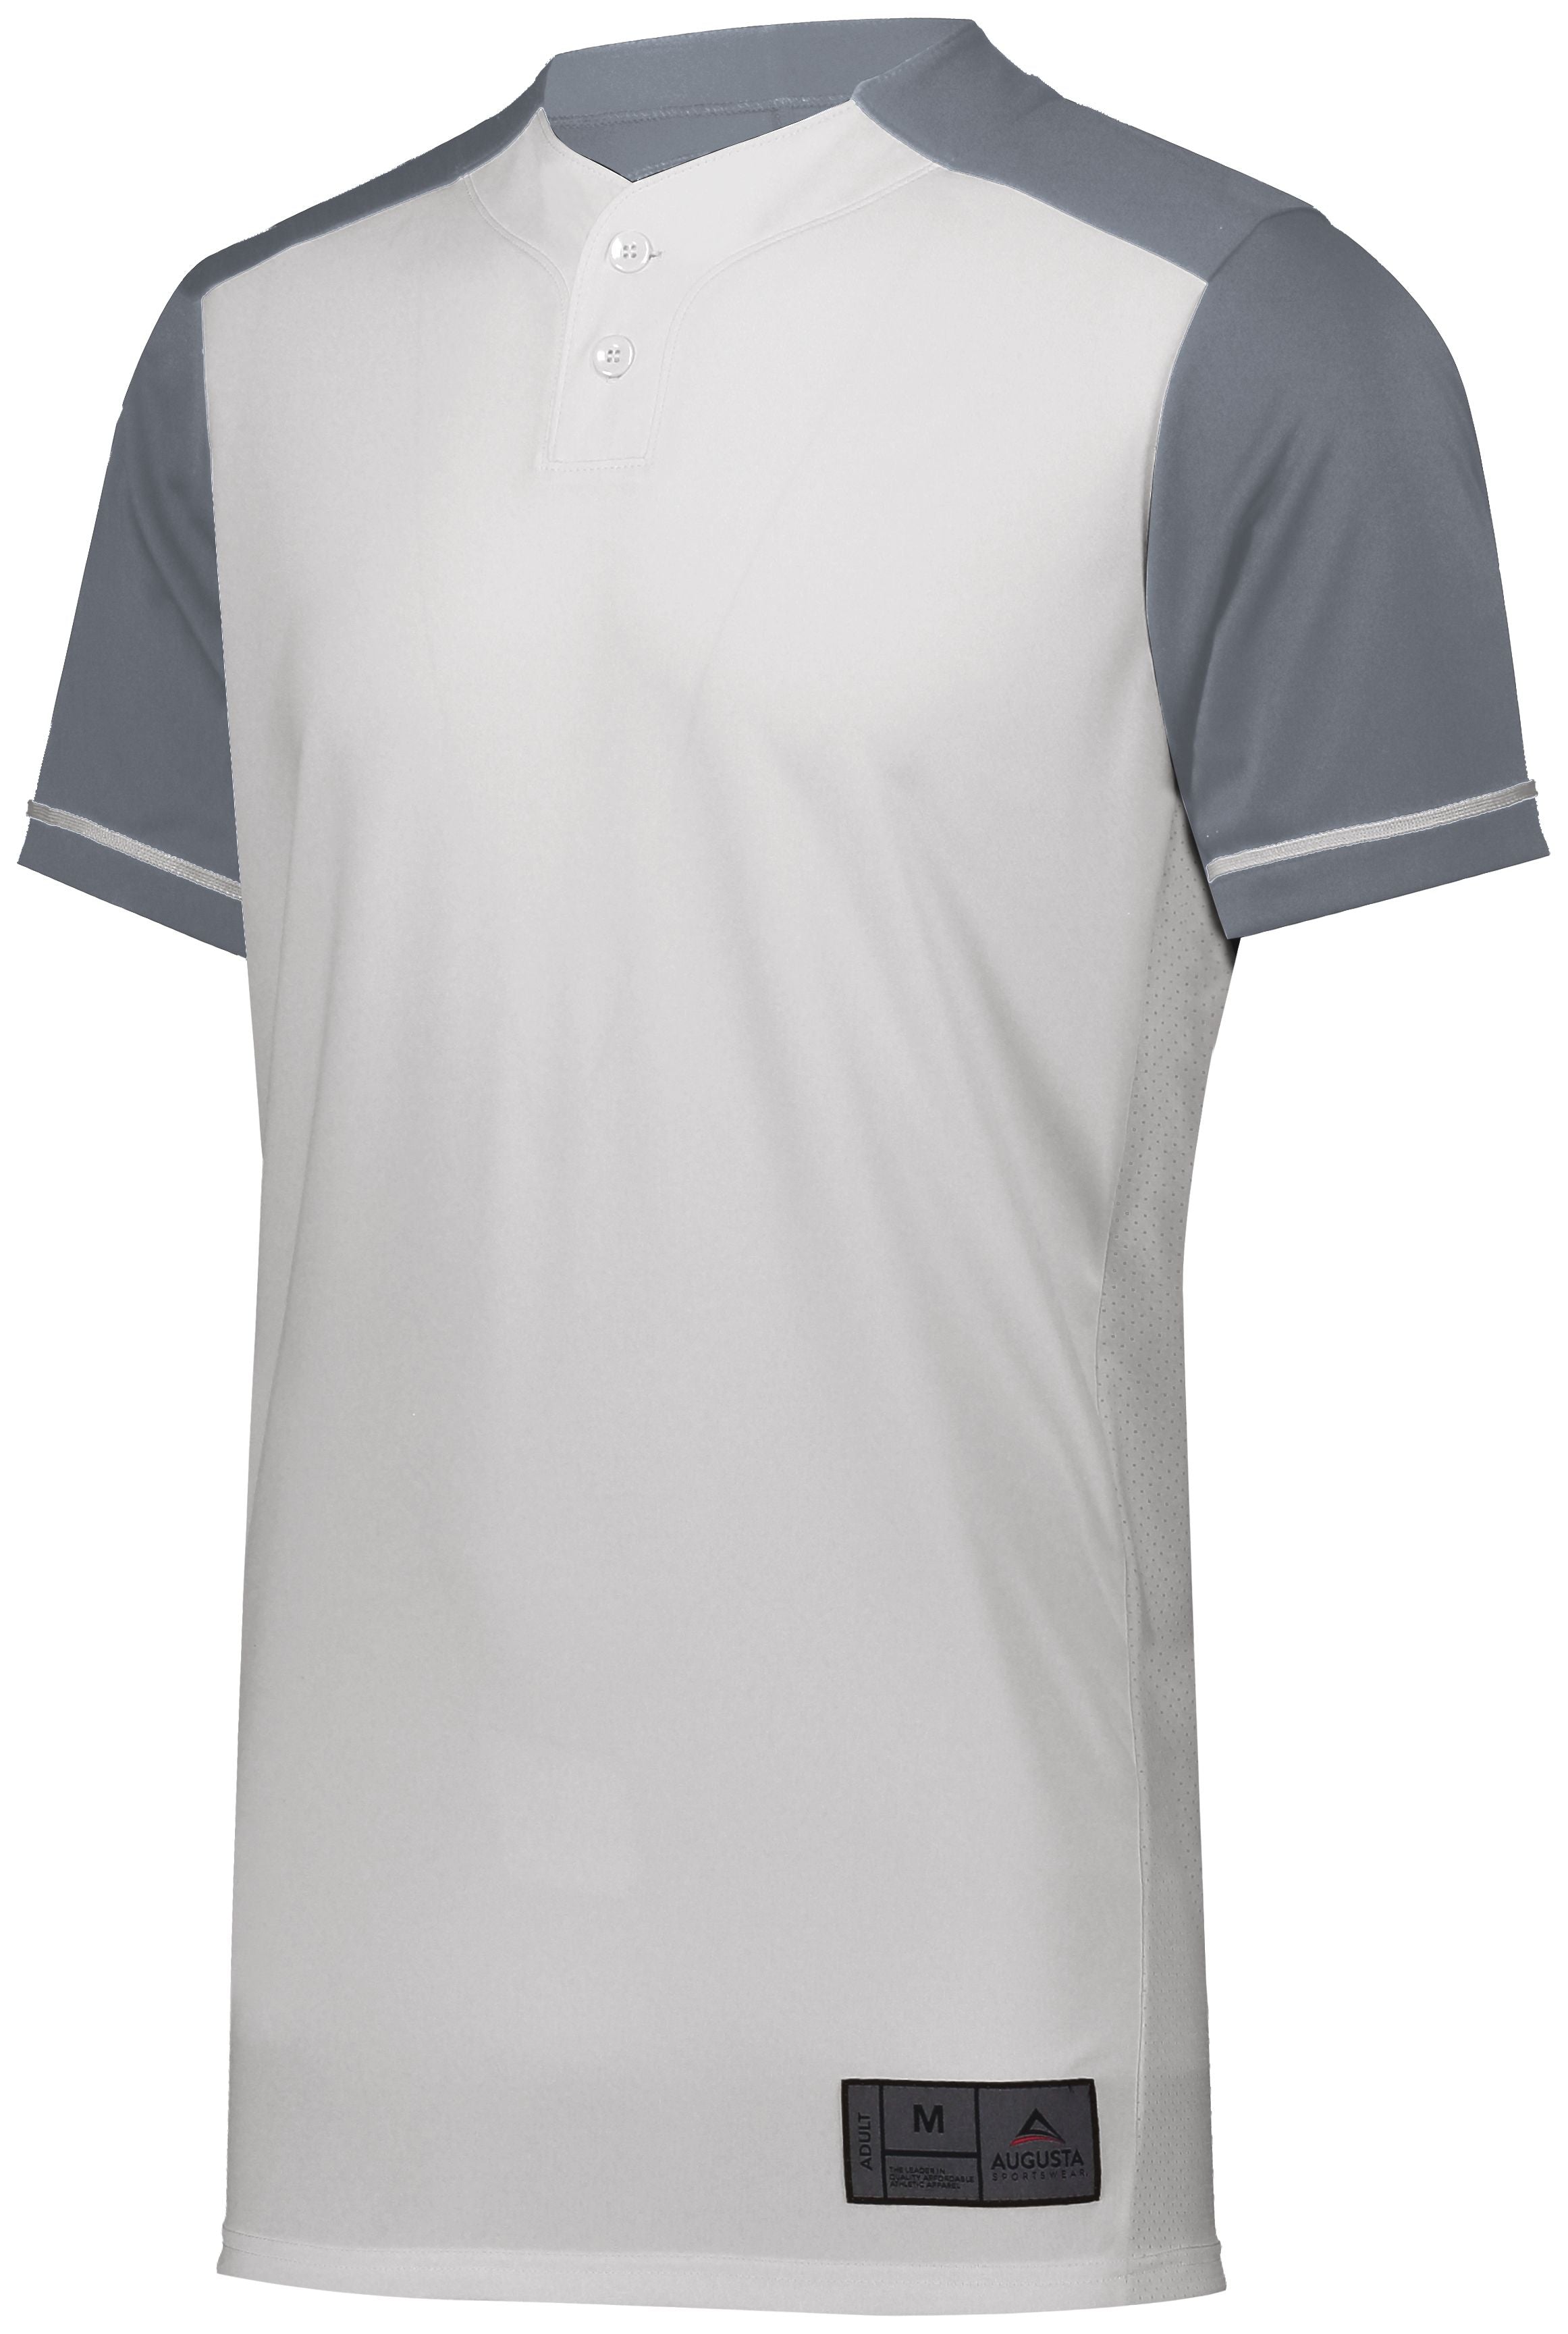 Augusta Sportswear Youth Closer Jersey in White/Graphite  -Part of the Youth, Youth-Jersey, Augusta-Products, Baseball, Shirts, All-Sports, All-Sports-1 product lines at KanaleyCreations.com